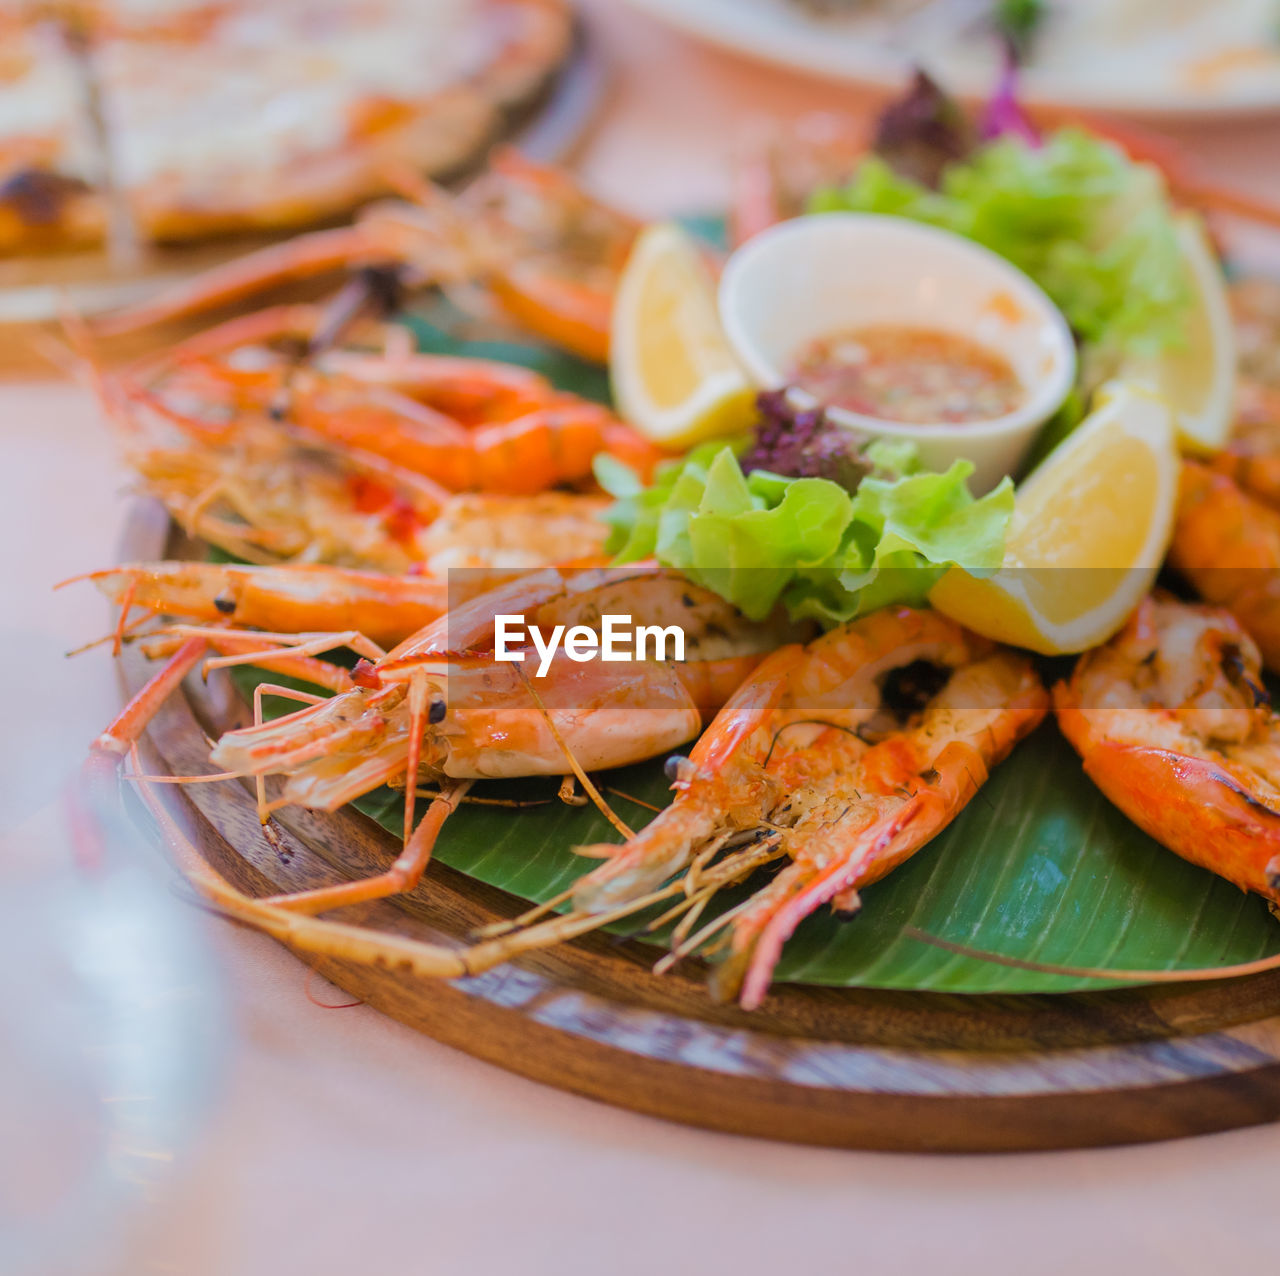 A picture of fresh grilled thai river prawns at luxury restaurant